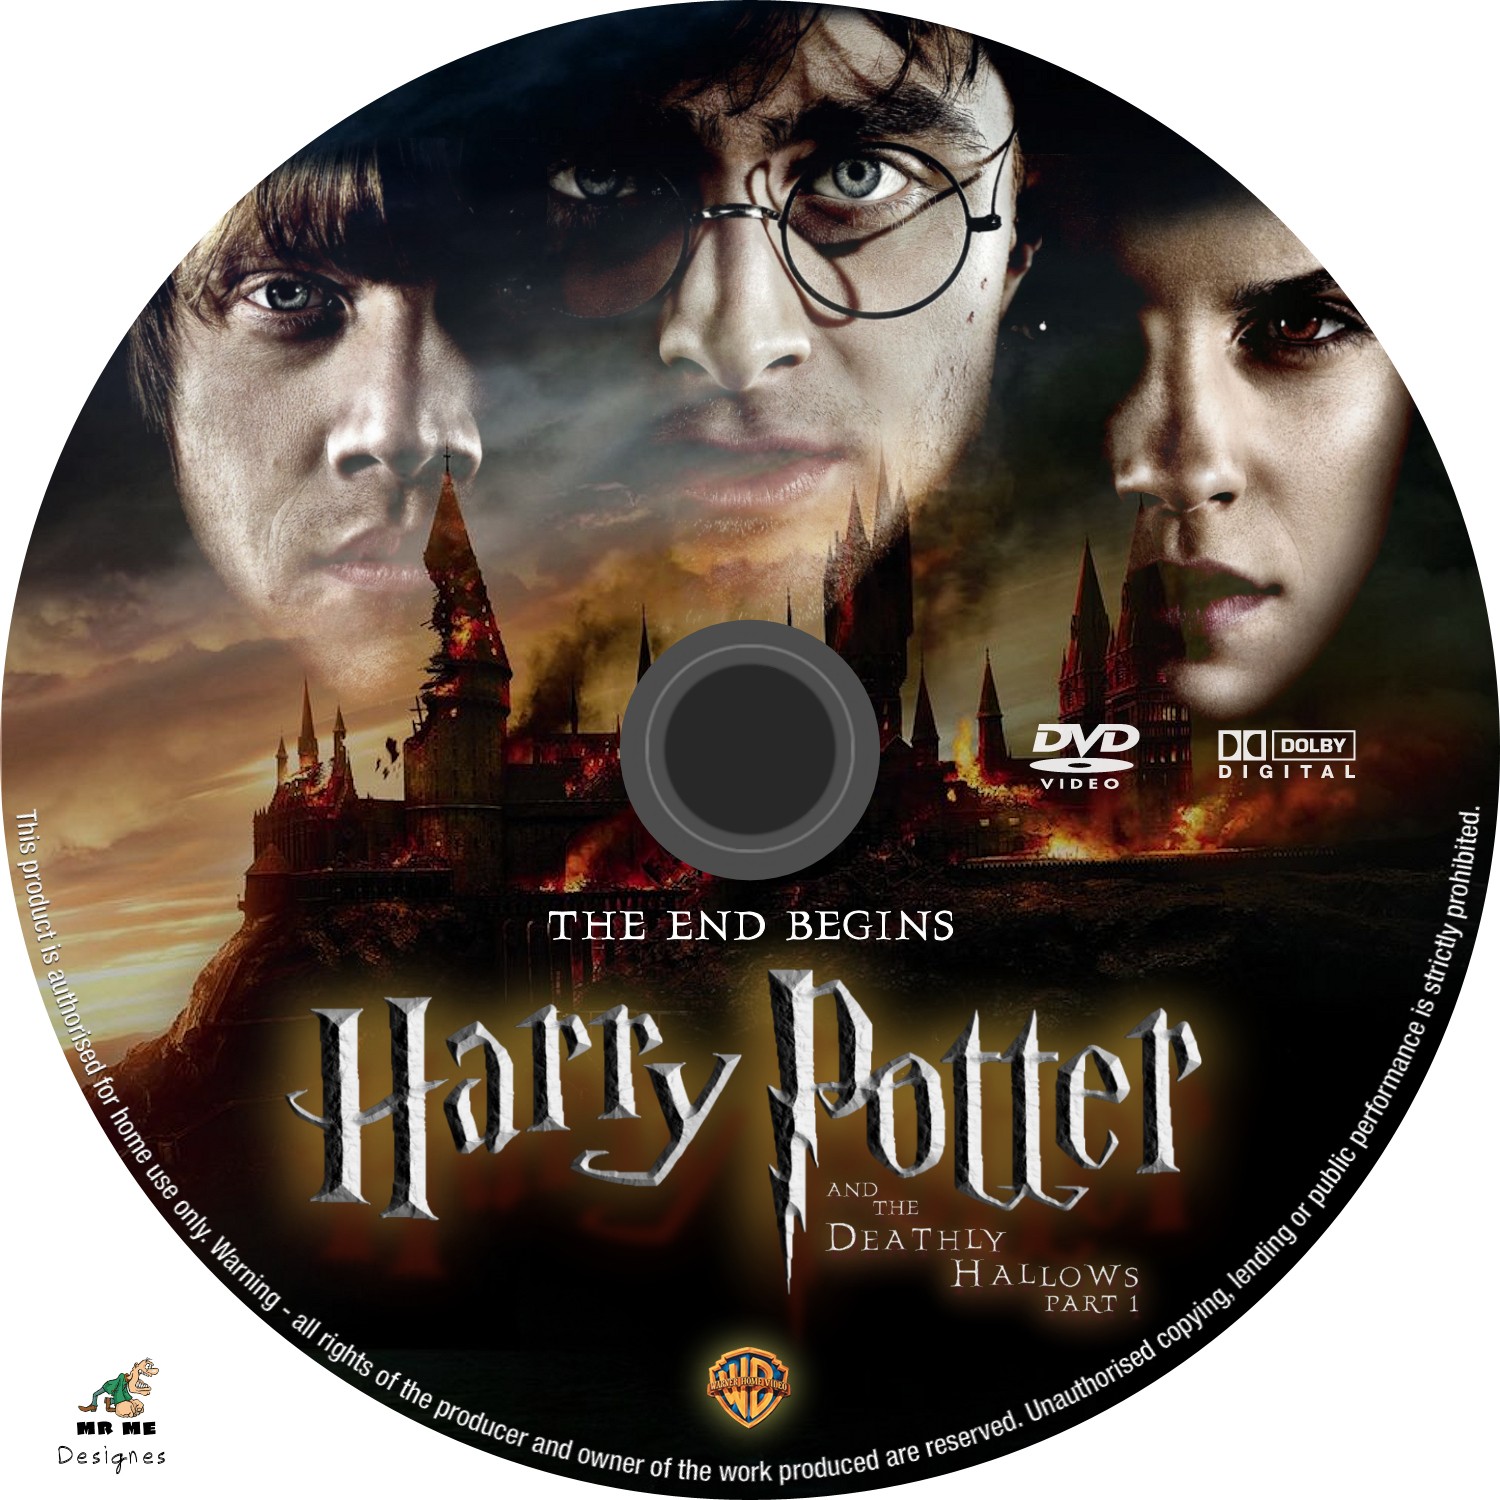 Harry Potter And The Deathly Hallows Part 2 (2011) Tsunami